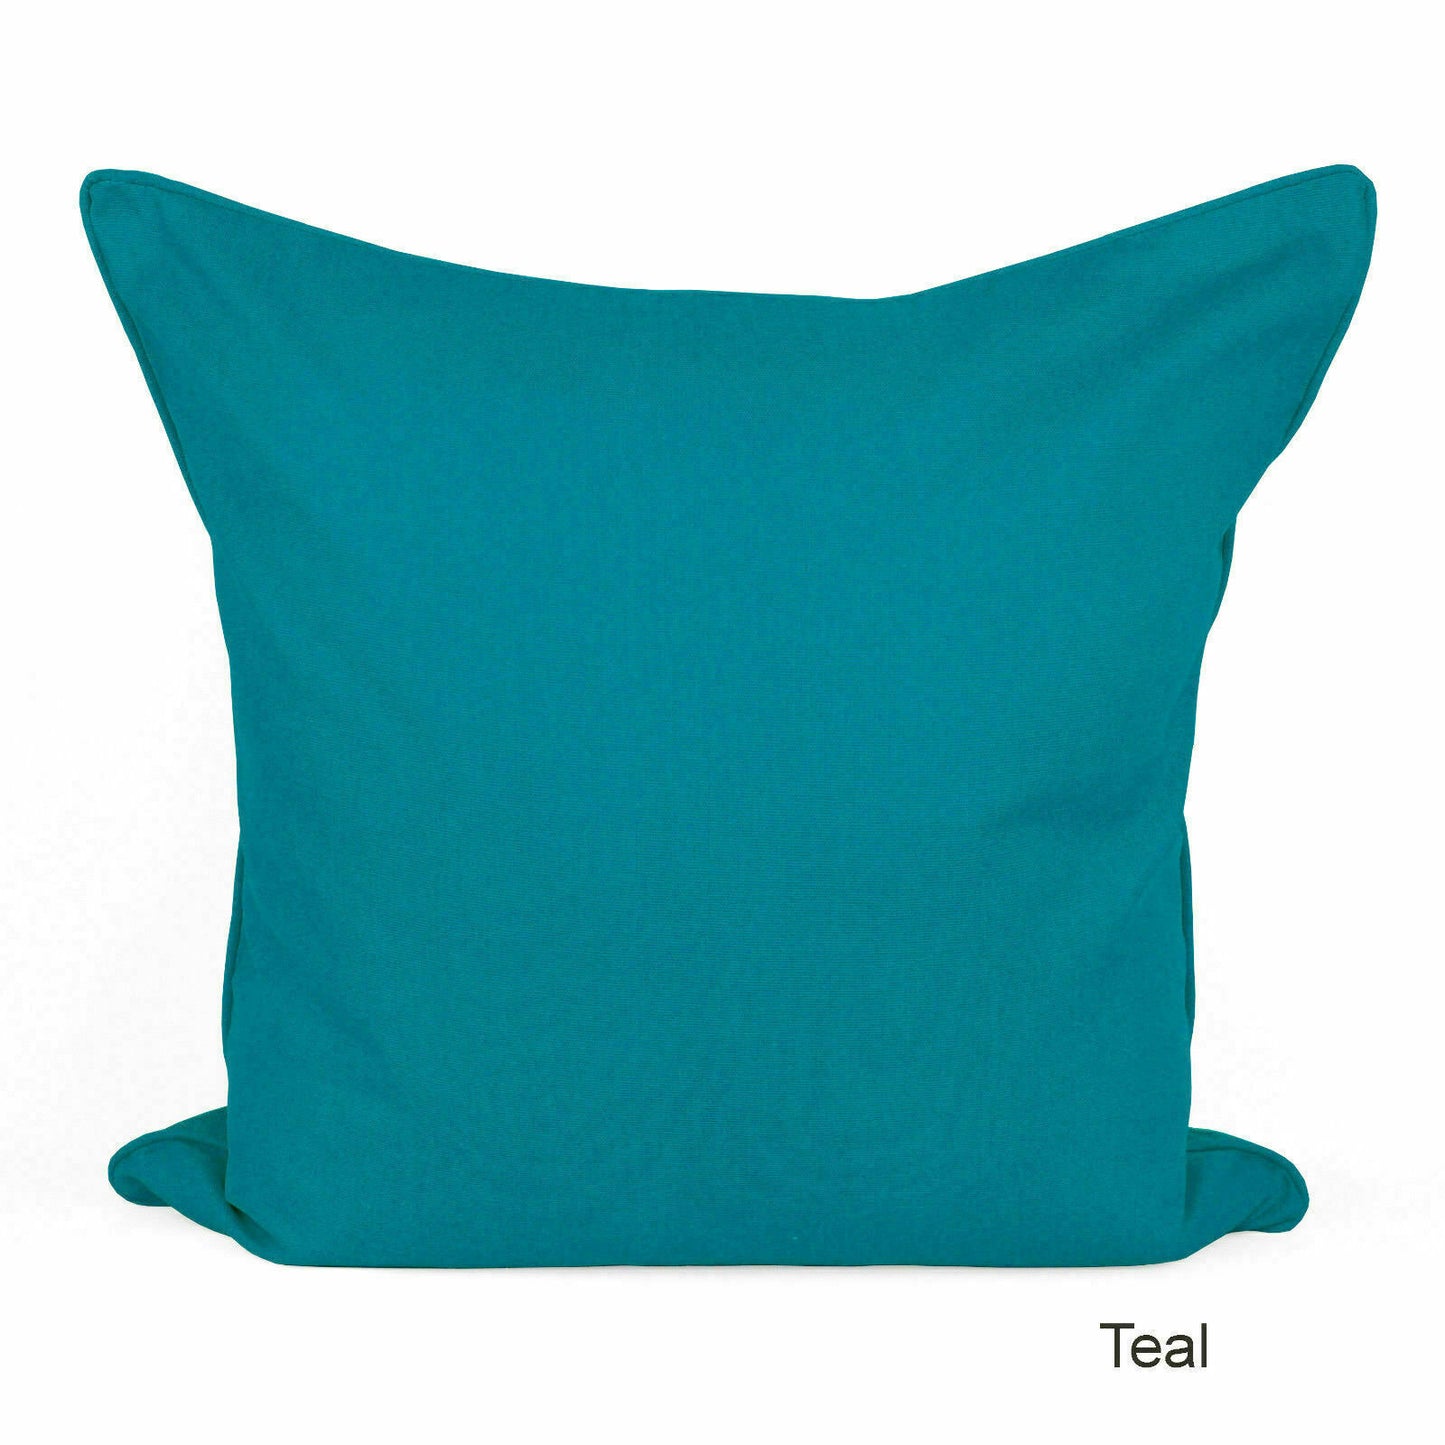 a teal colored pillow on a white background